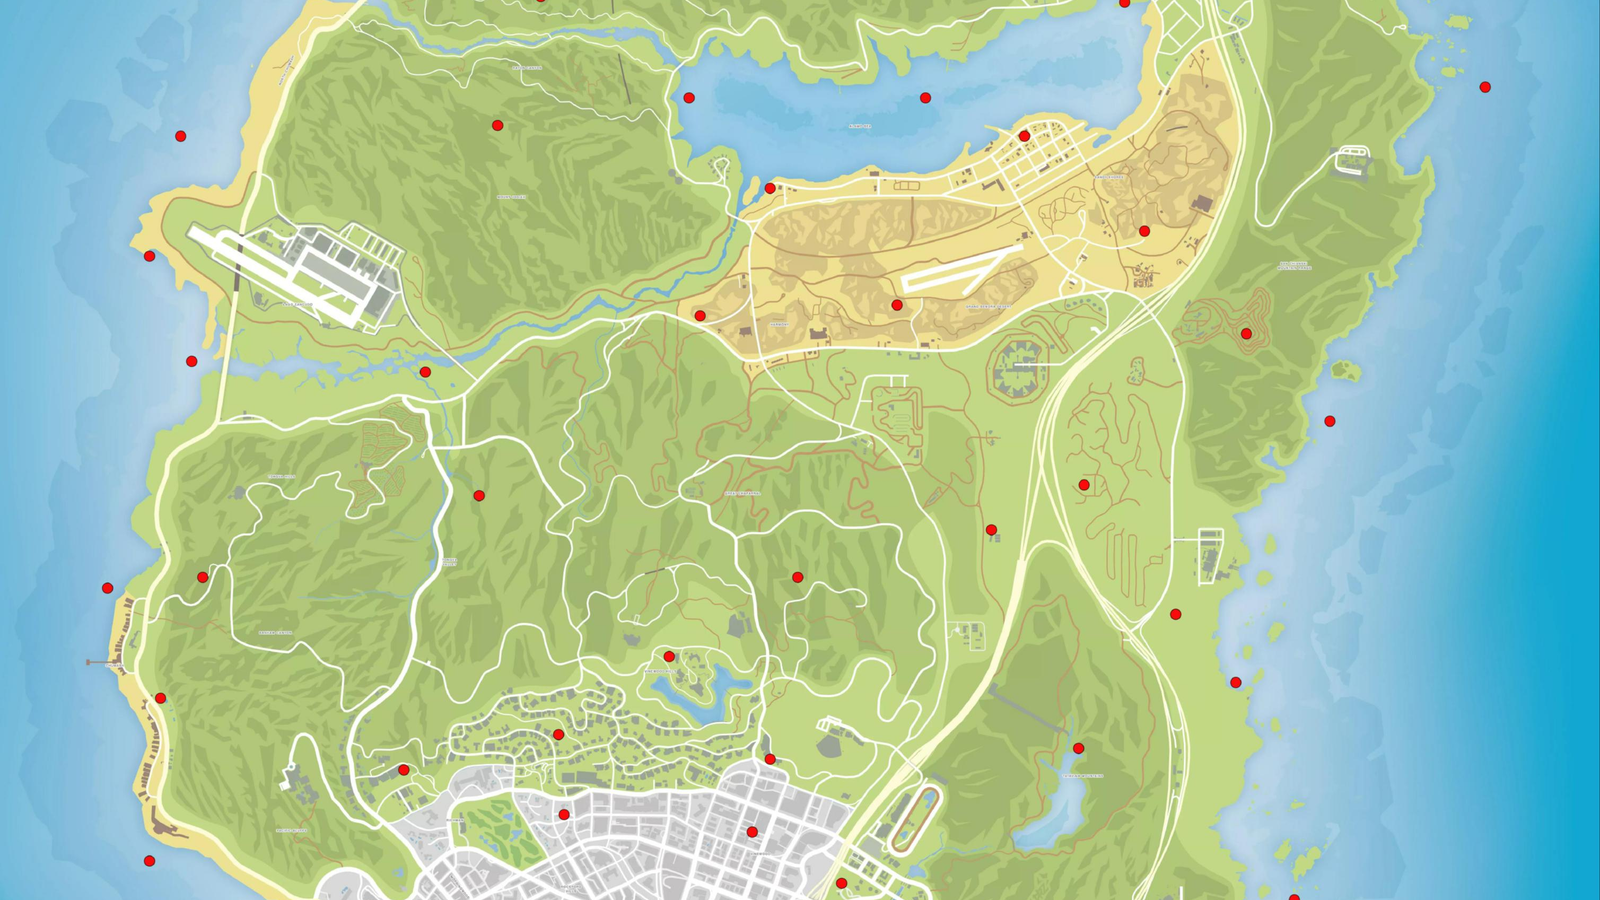 GTA Online Peyote plant locations 2020 - How to turn into animals